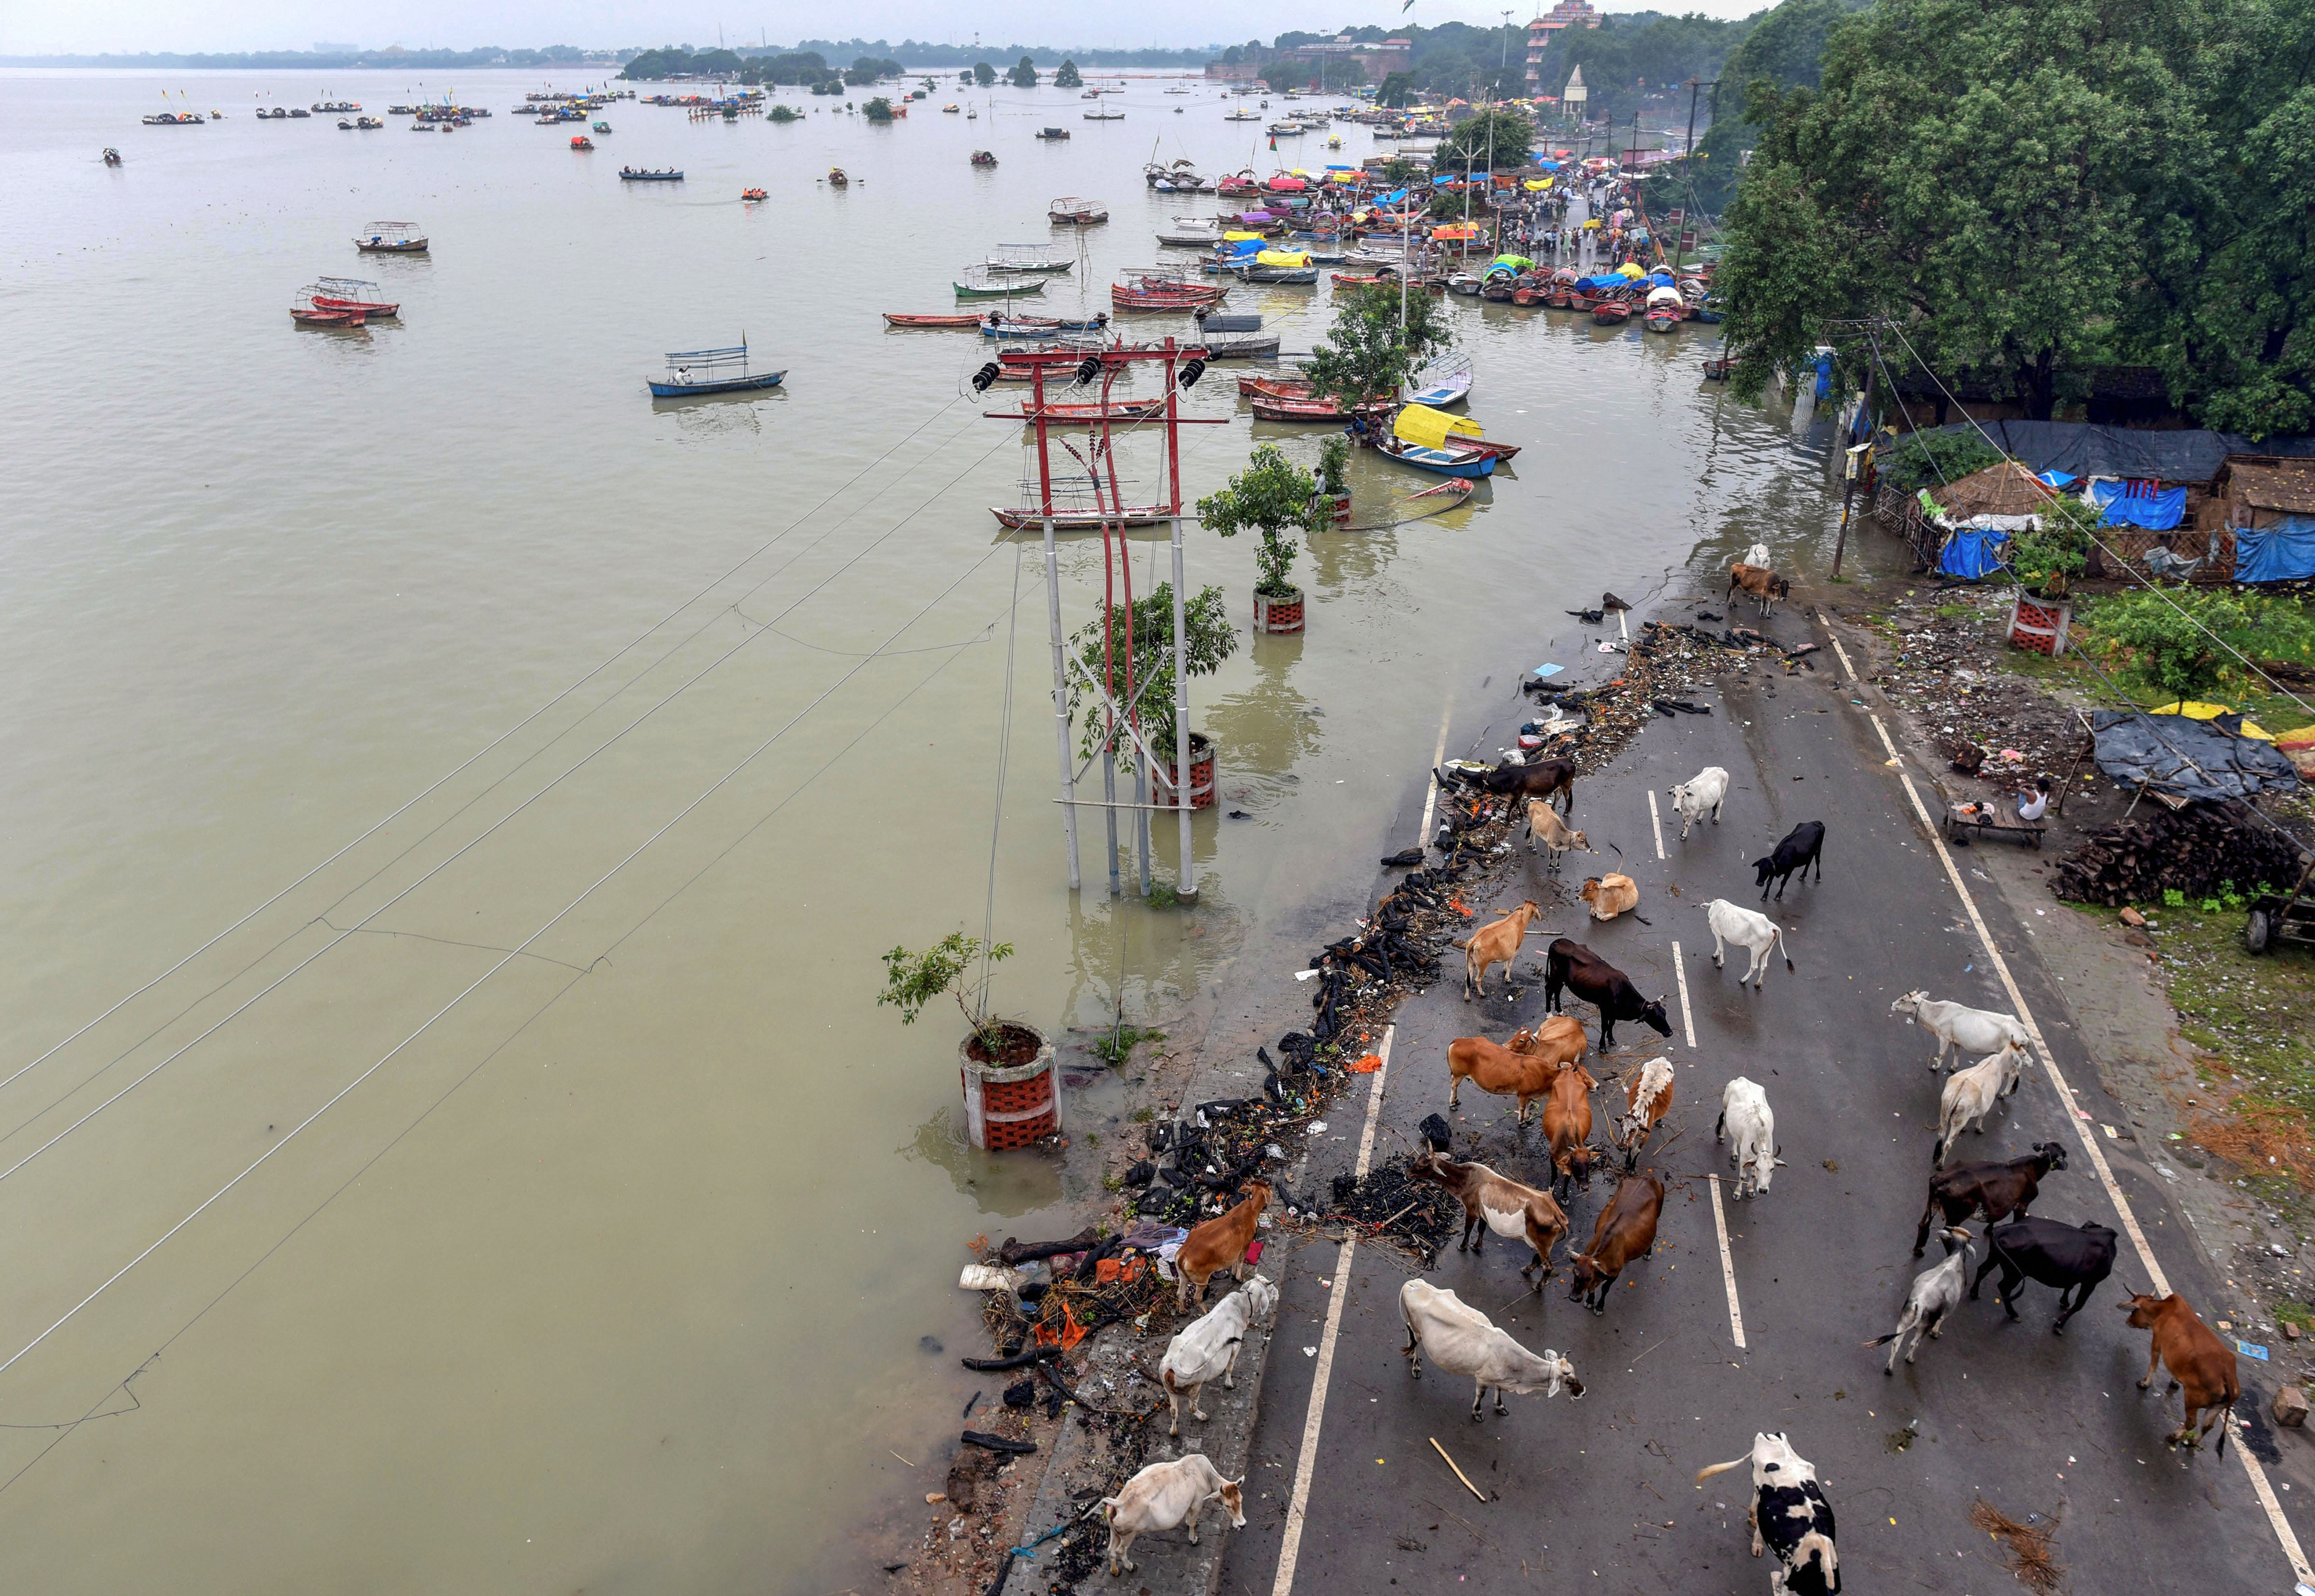 A herd of cattle seen stranded on a partially submerged road along the banks of a river, in Prayagraj - PTI